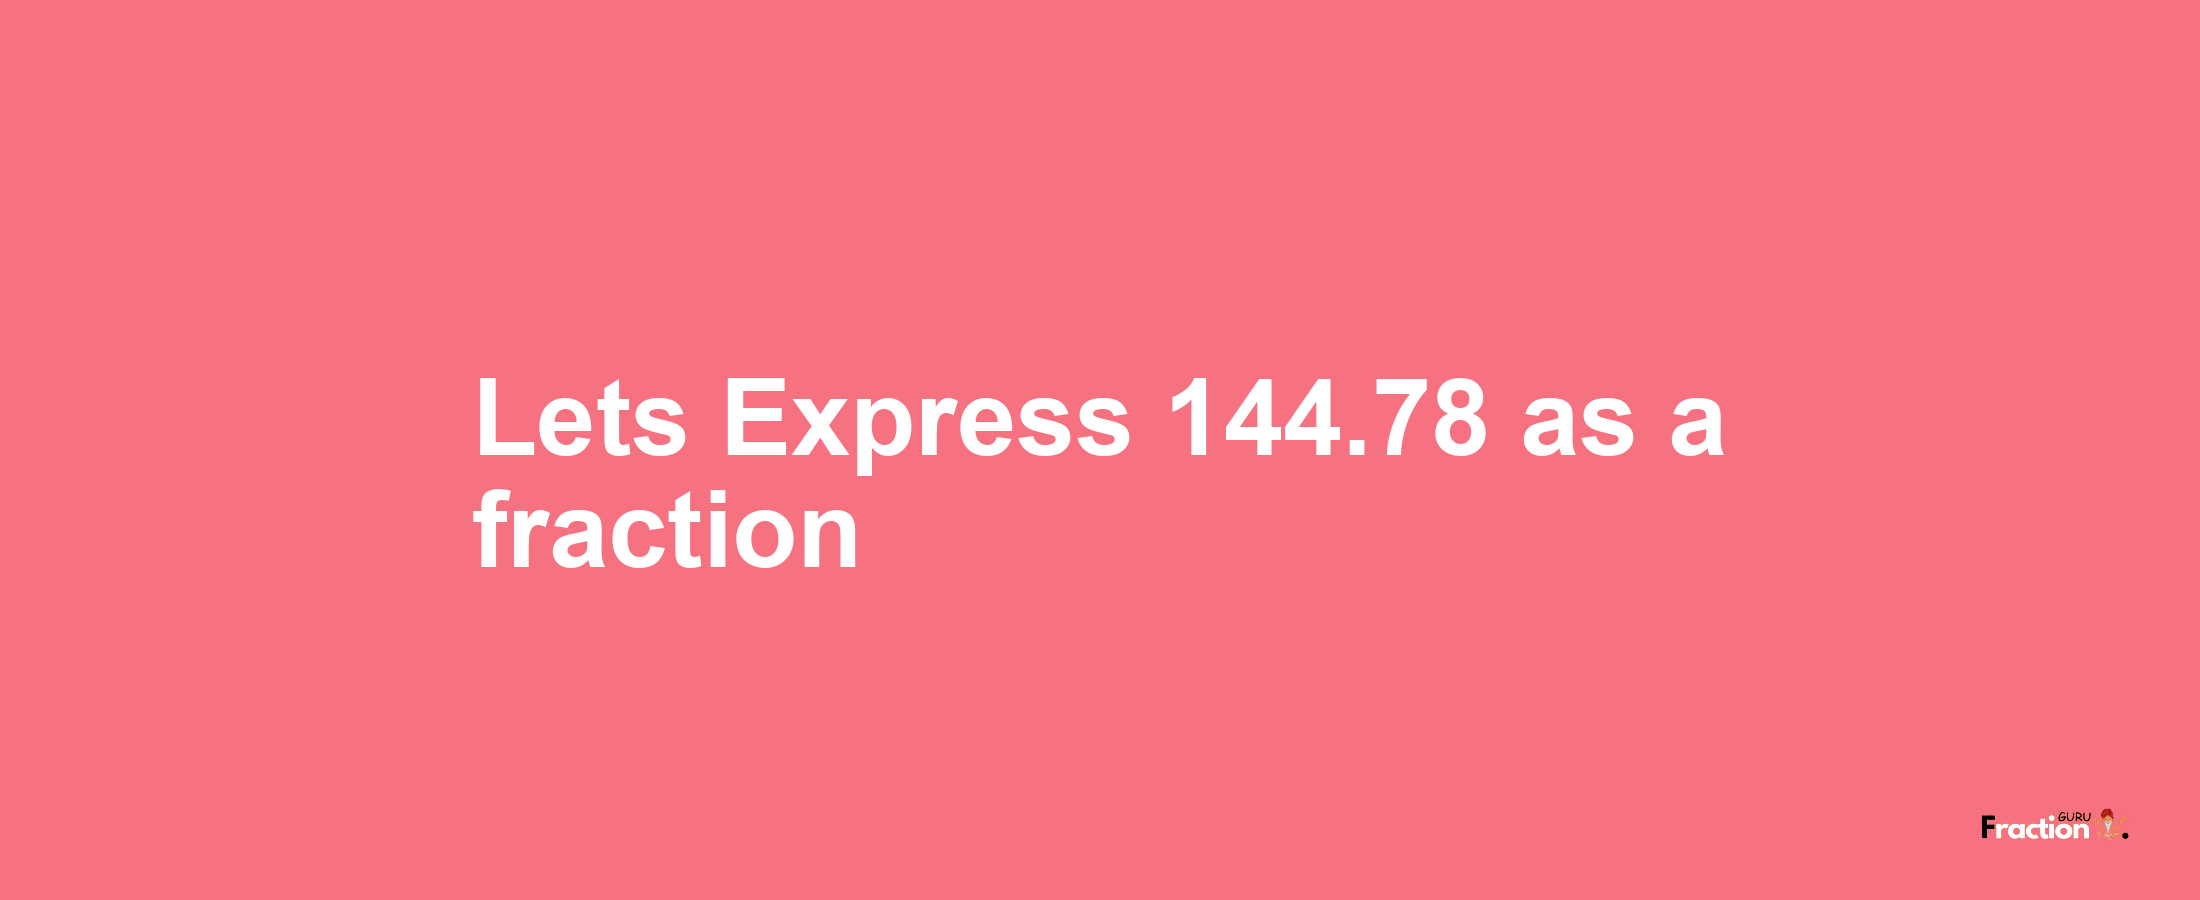 Lets Express 144.78 as afraction